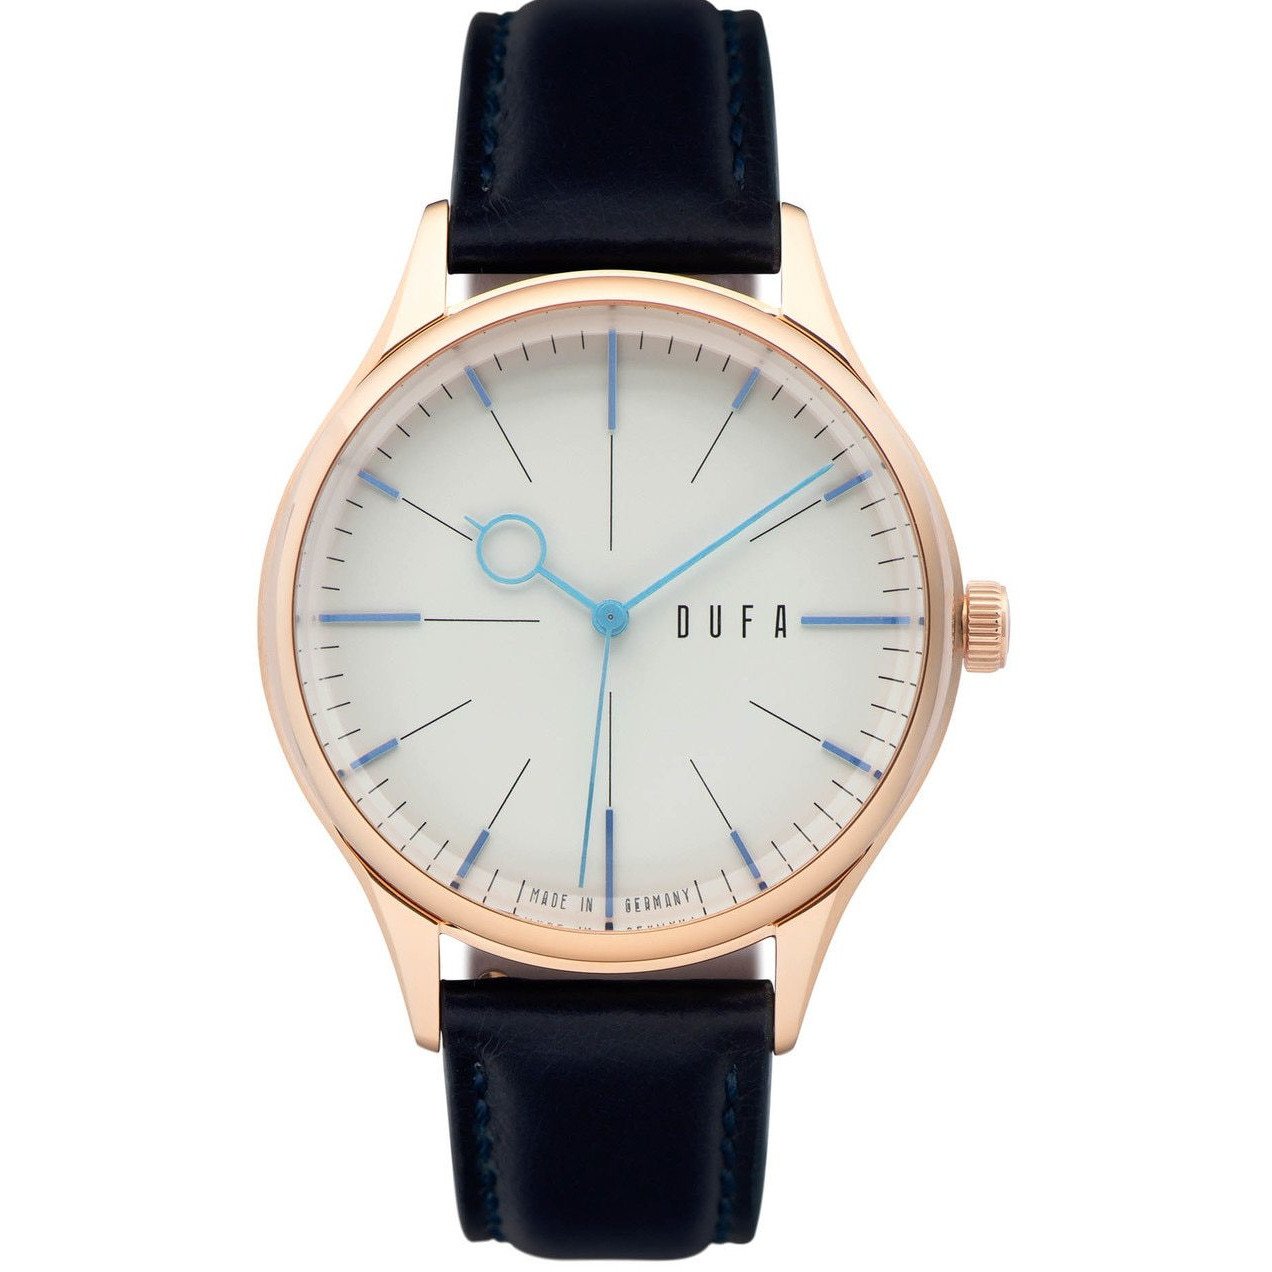 DuFa Weimar Moller Edition Rose Gold White